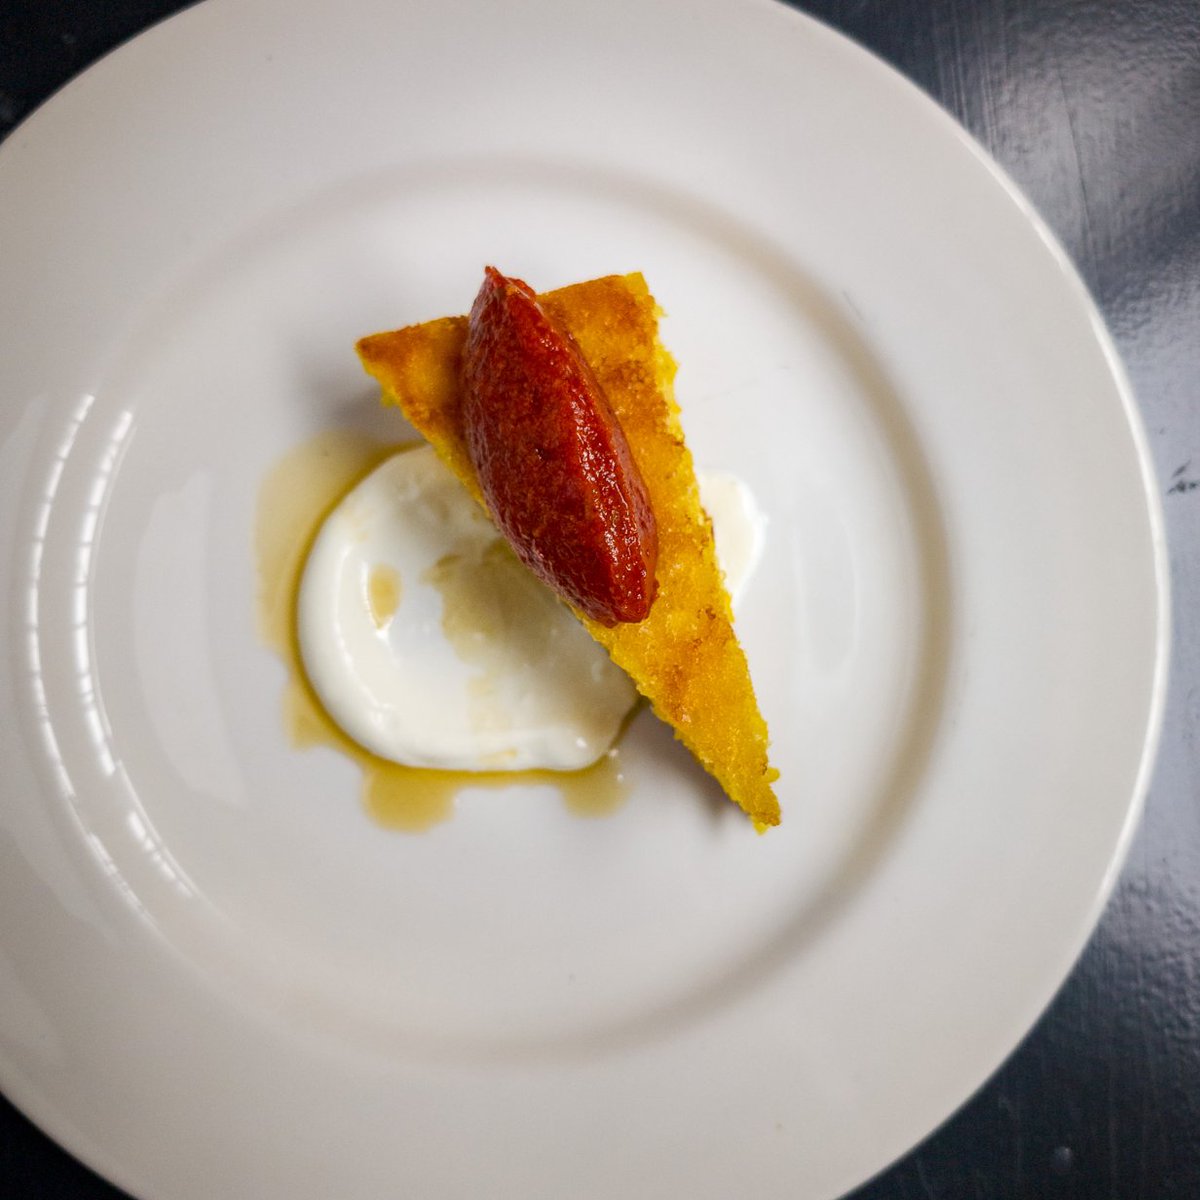 Warm jalapeño cornbread with sour cream, tomato and smoked bacon jam One of the starters from our '2 courses for £15' menu this April!